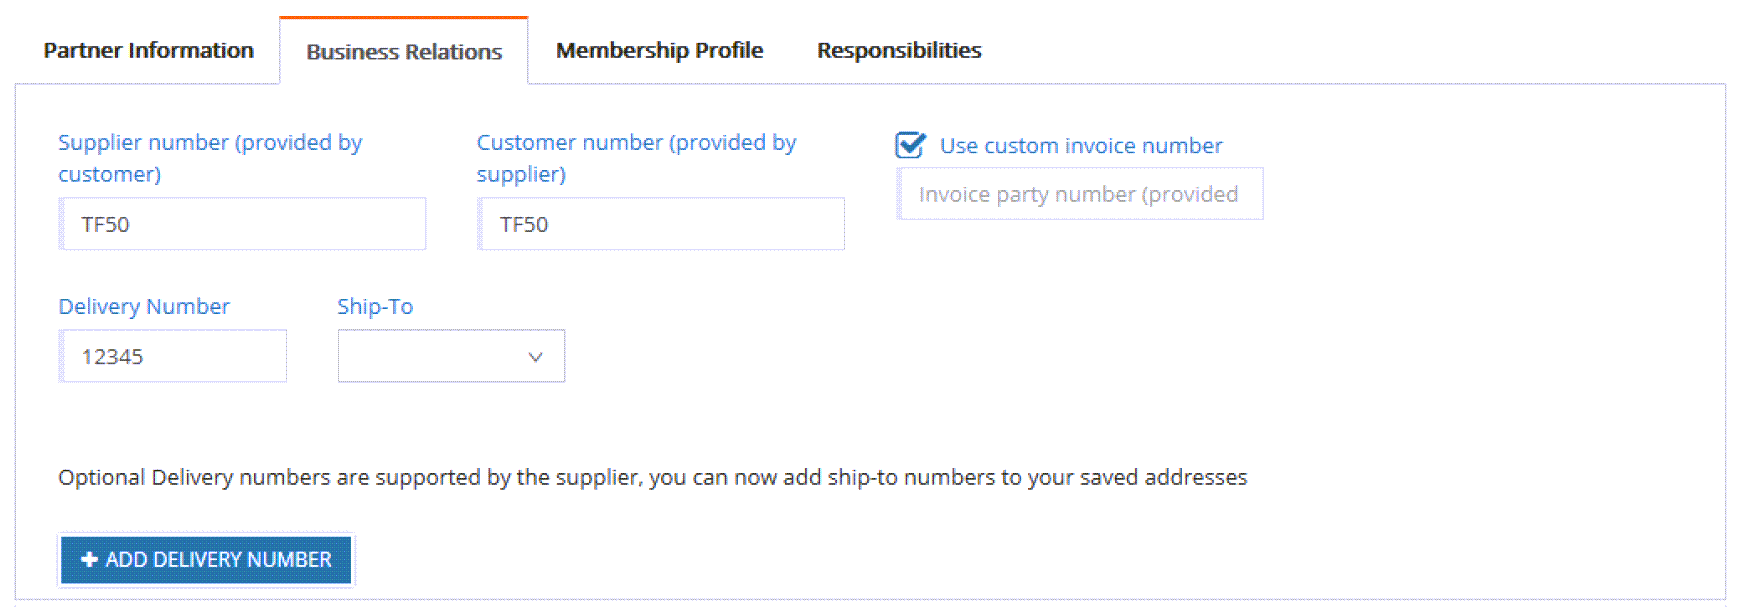 anydeliverynumberisaccepted.png